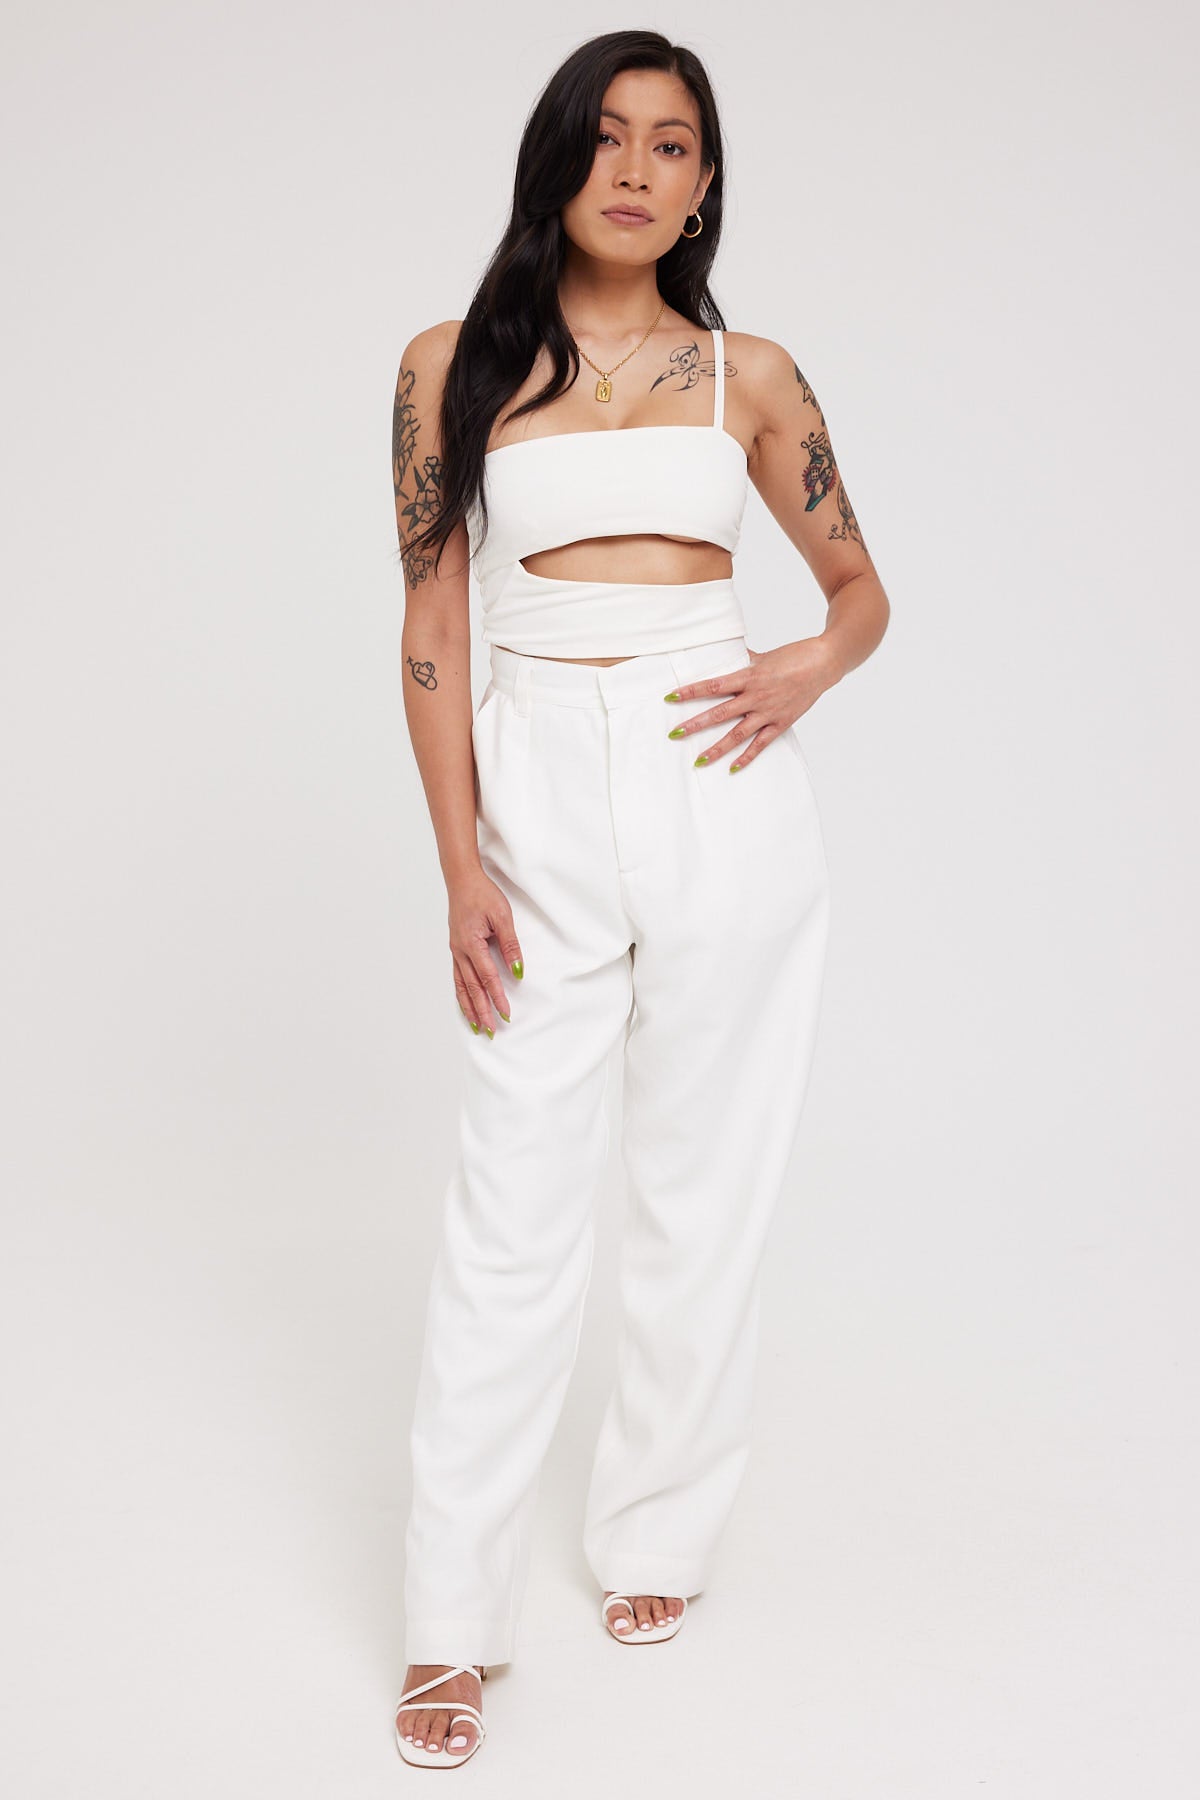 Perfect Stranger Stay With Me Petite Pant White